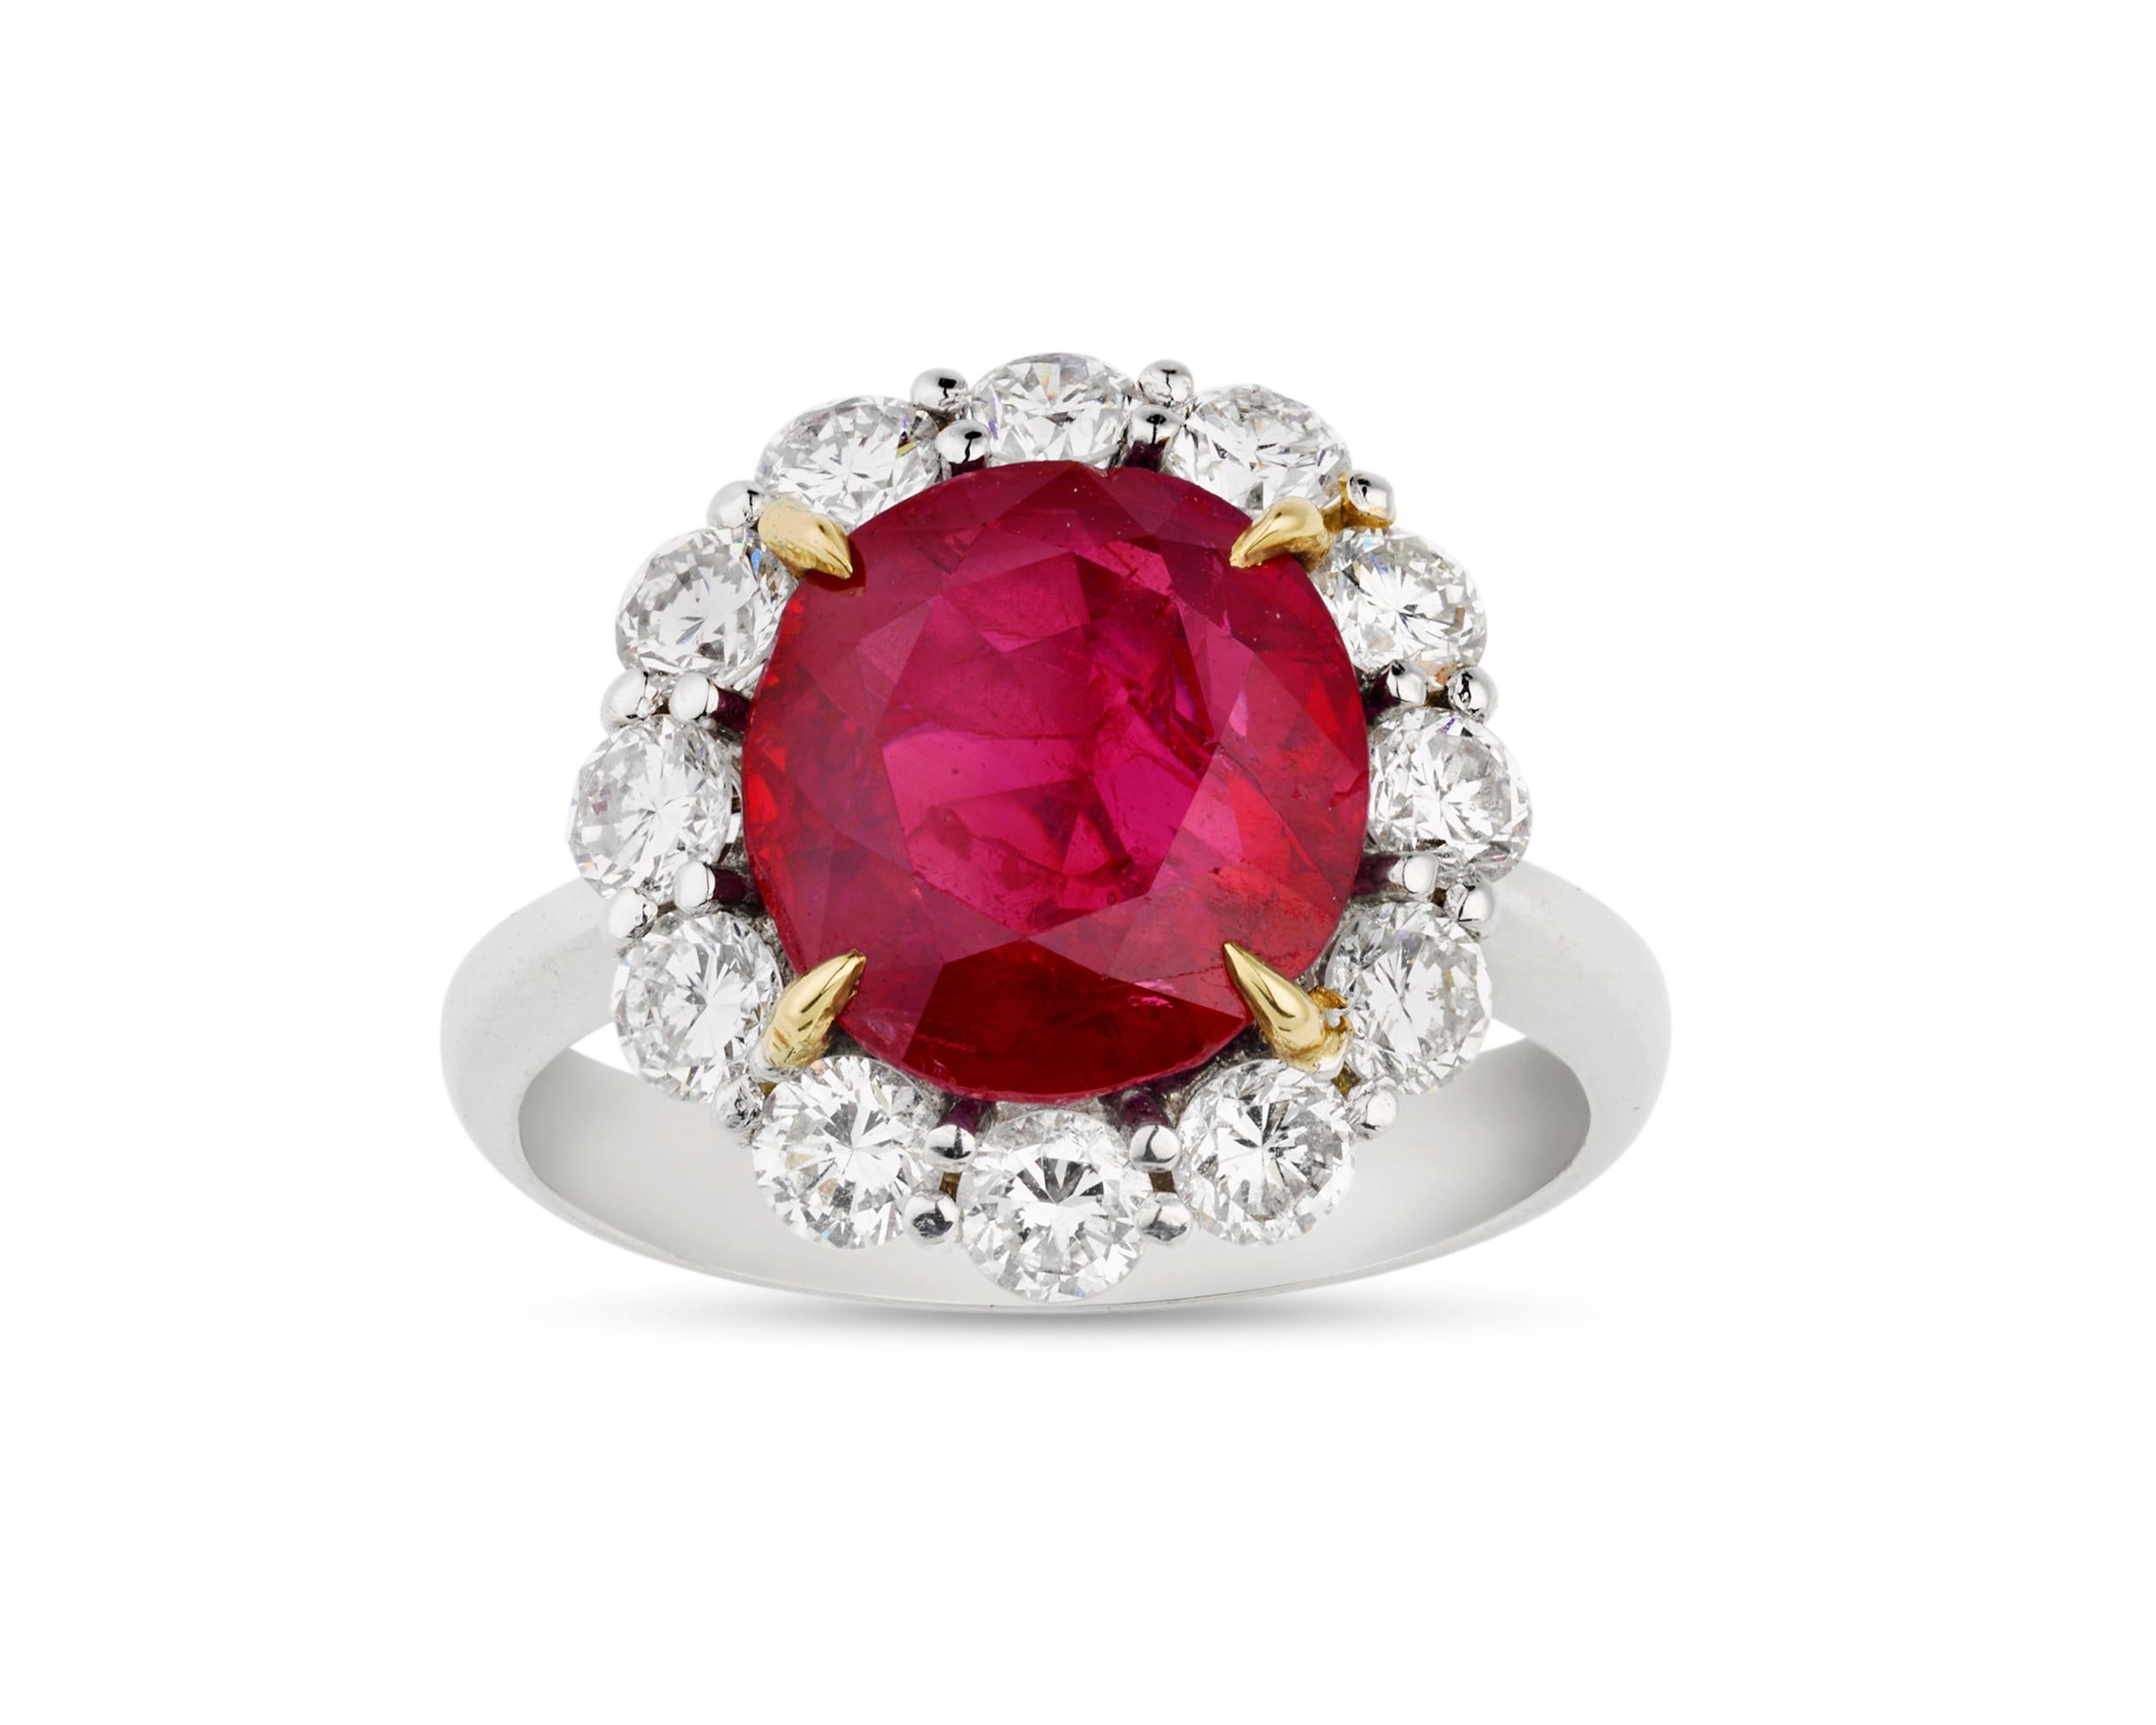 Dramatic yet classic, a 5.25-carat oval mixed-cut Burma ruby exhibits its ideal red hue in this ring. For centuries, the Burmese ruby has ranked among the most sought-after gemstones in the world, as stones that hail from these legendary mines are